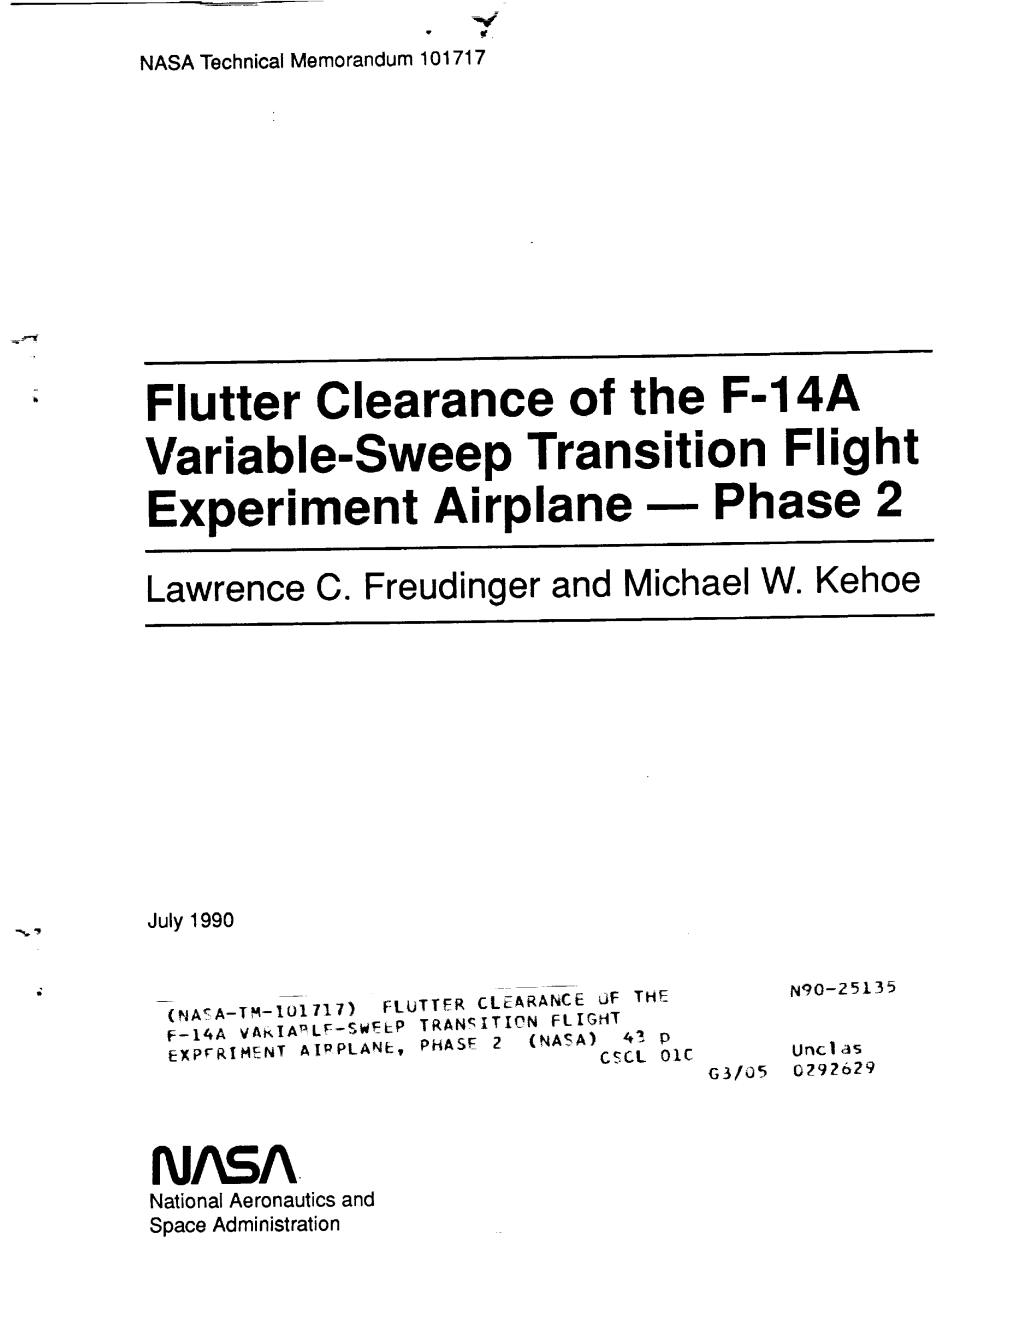 Flutter Clearance of the F-14A Variable-Sweep Transition Flight Experiment Airplane--- Phase 2